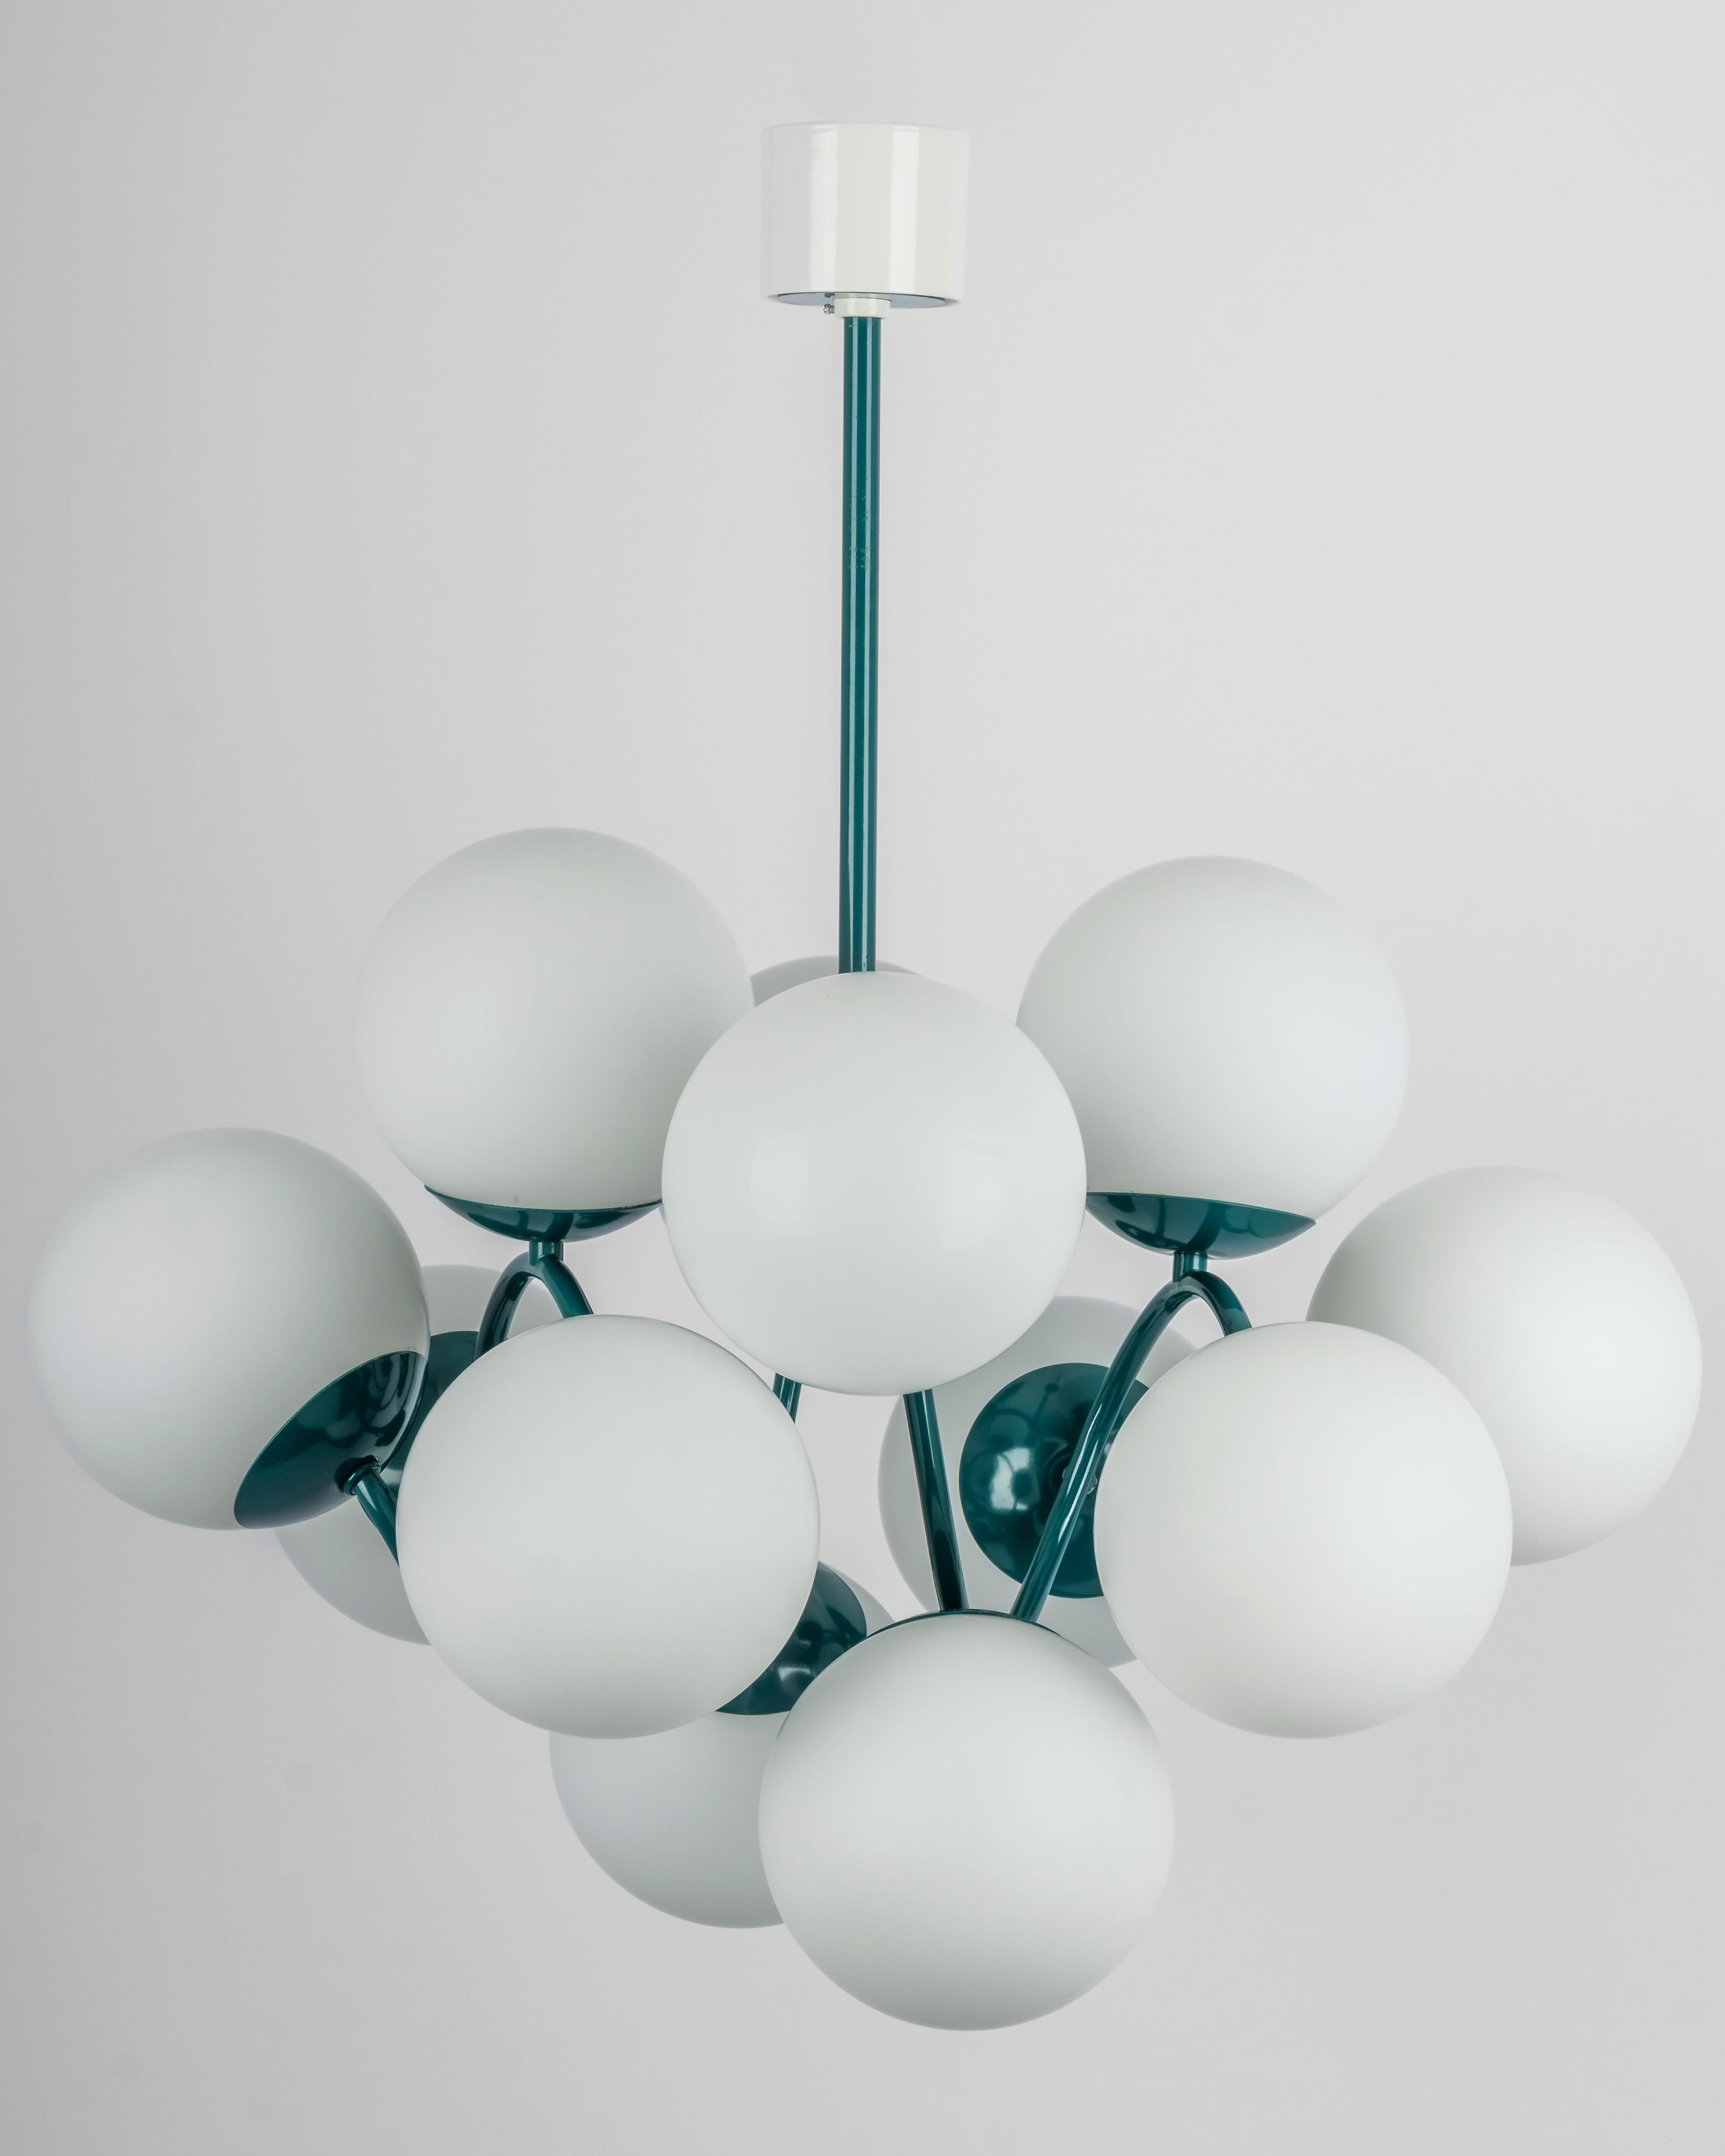 Wonderful Sputnik chandelier made by Kaiser Leuchten, Germany, circa 1970-1979.
Great Atomium-shaped chandelier with 12 opal glasses.

High quality and in very good condition. Cleaned, well-wired and ready to use. 

The fixture requires 12 x E27